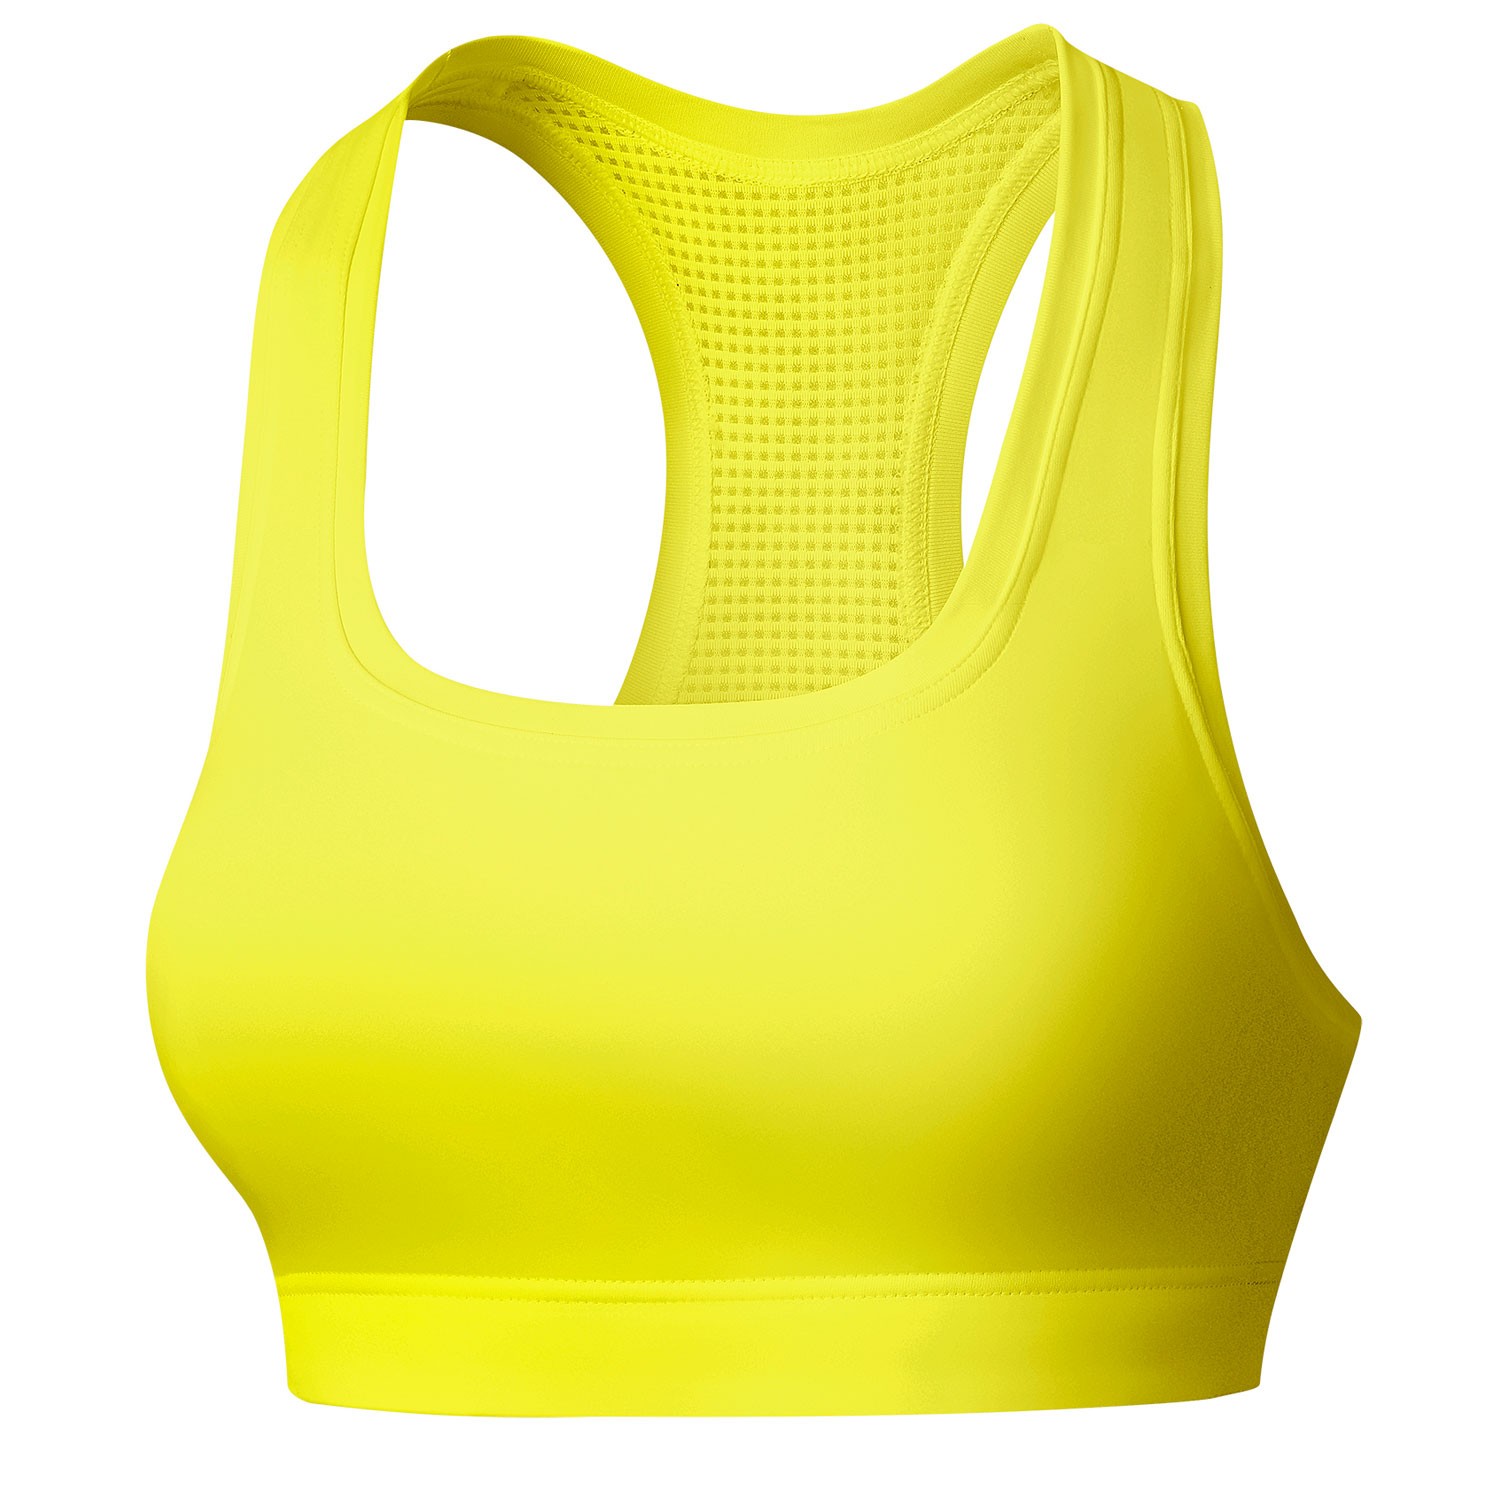 Casall Iconic Sports Bra C/D Punch